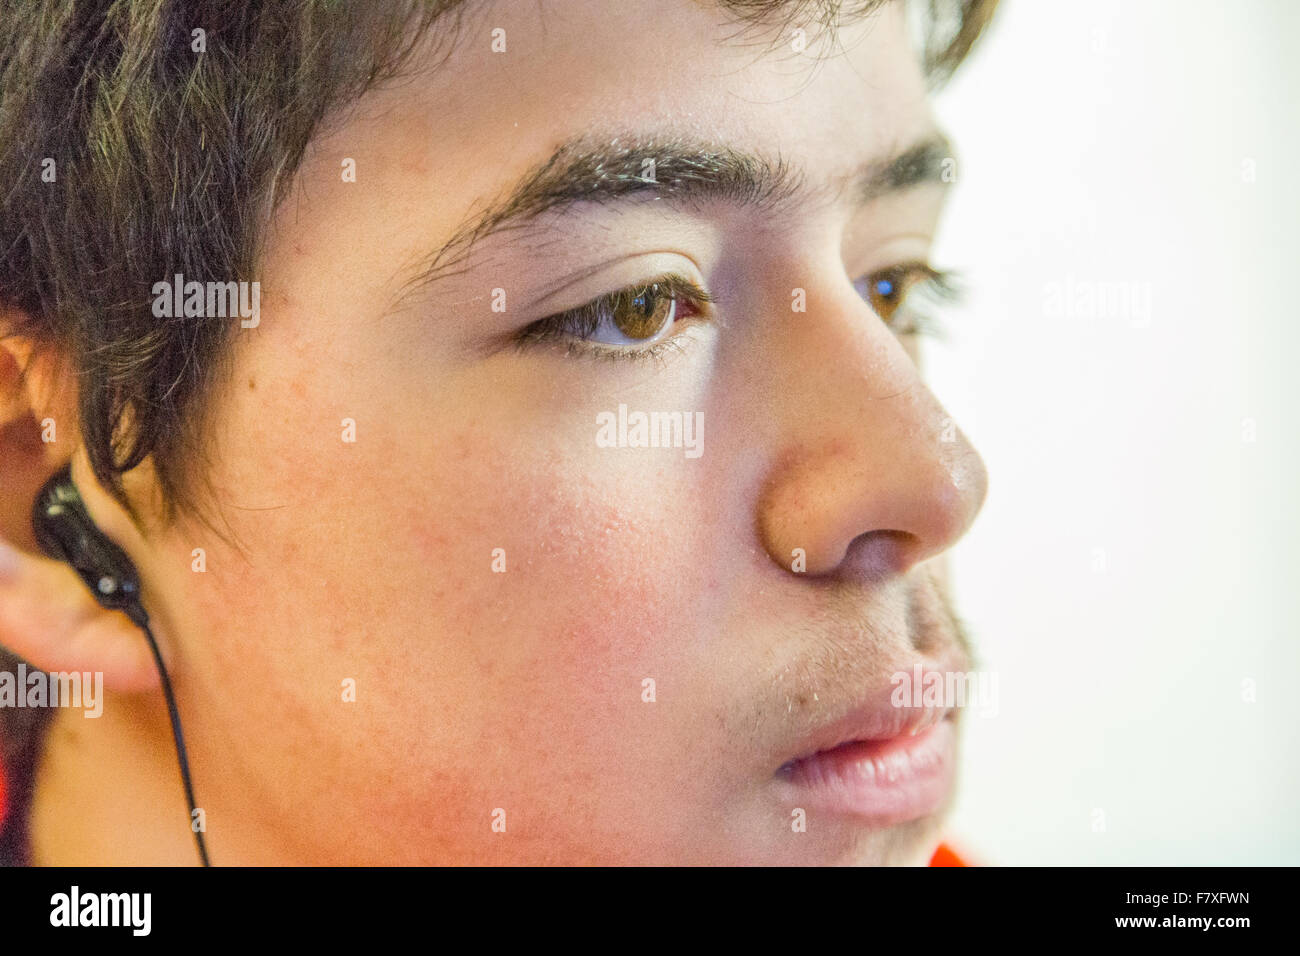 Close-up of a Teenage boy wearing earphones Banque D'Images